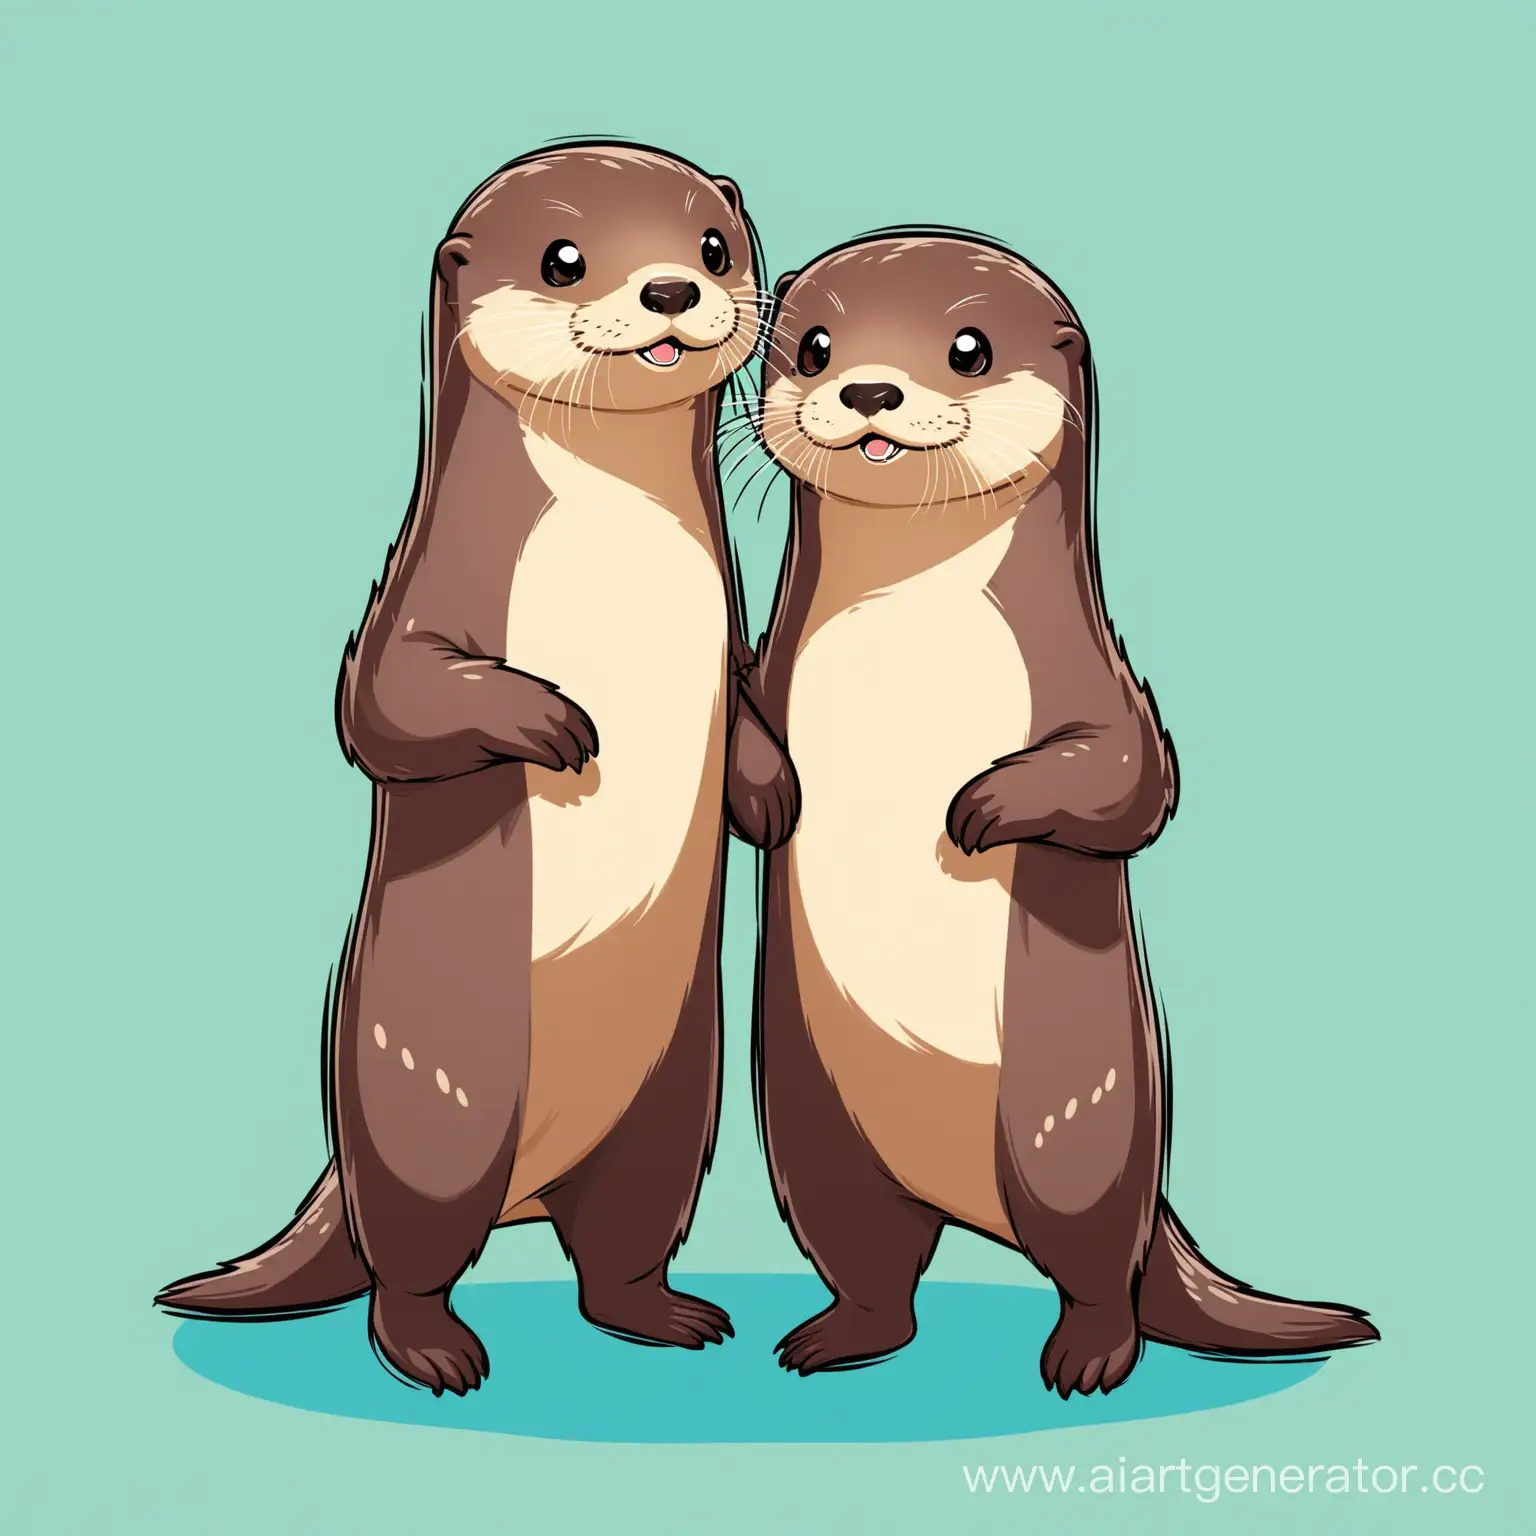 Playful-Mascot-Otters-Frolicking-Together